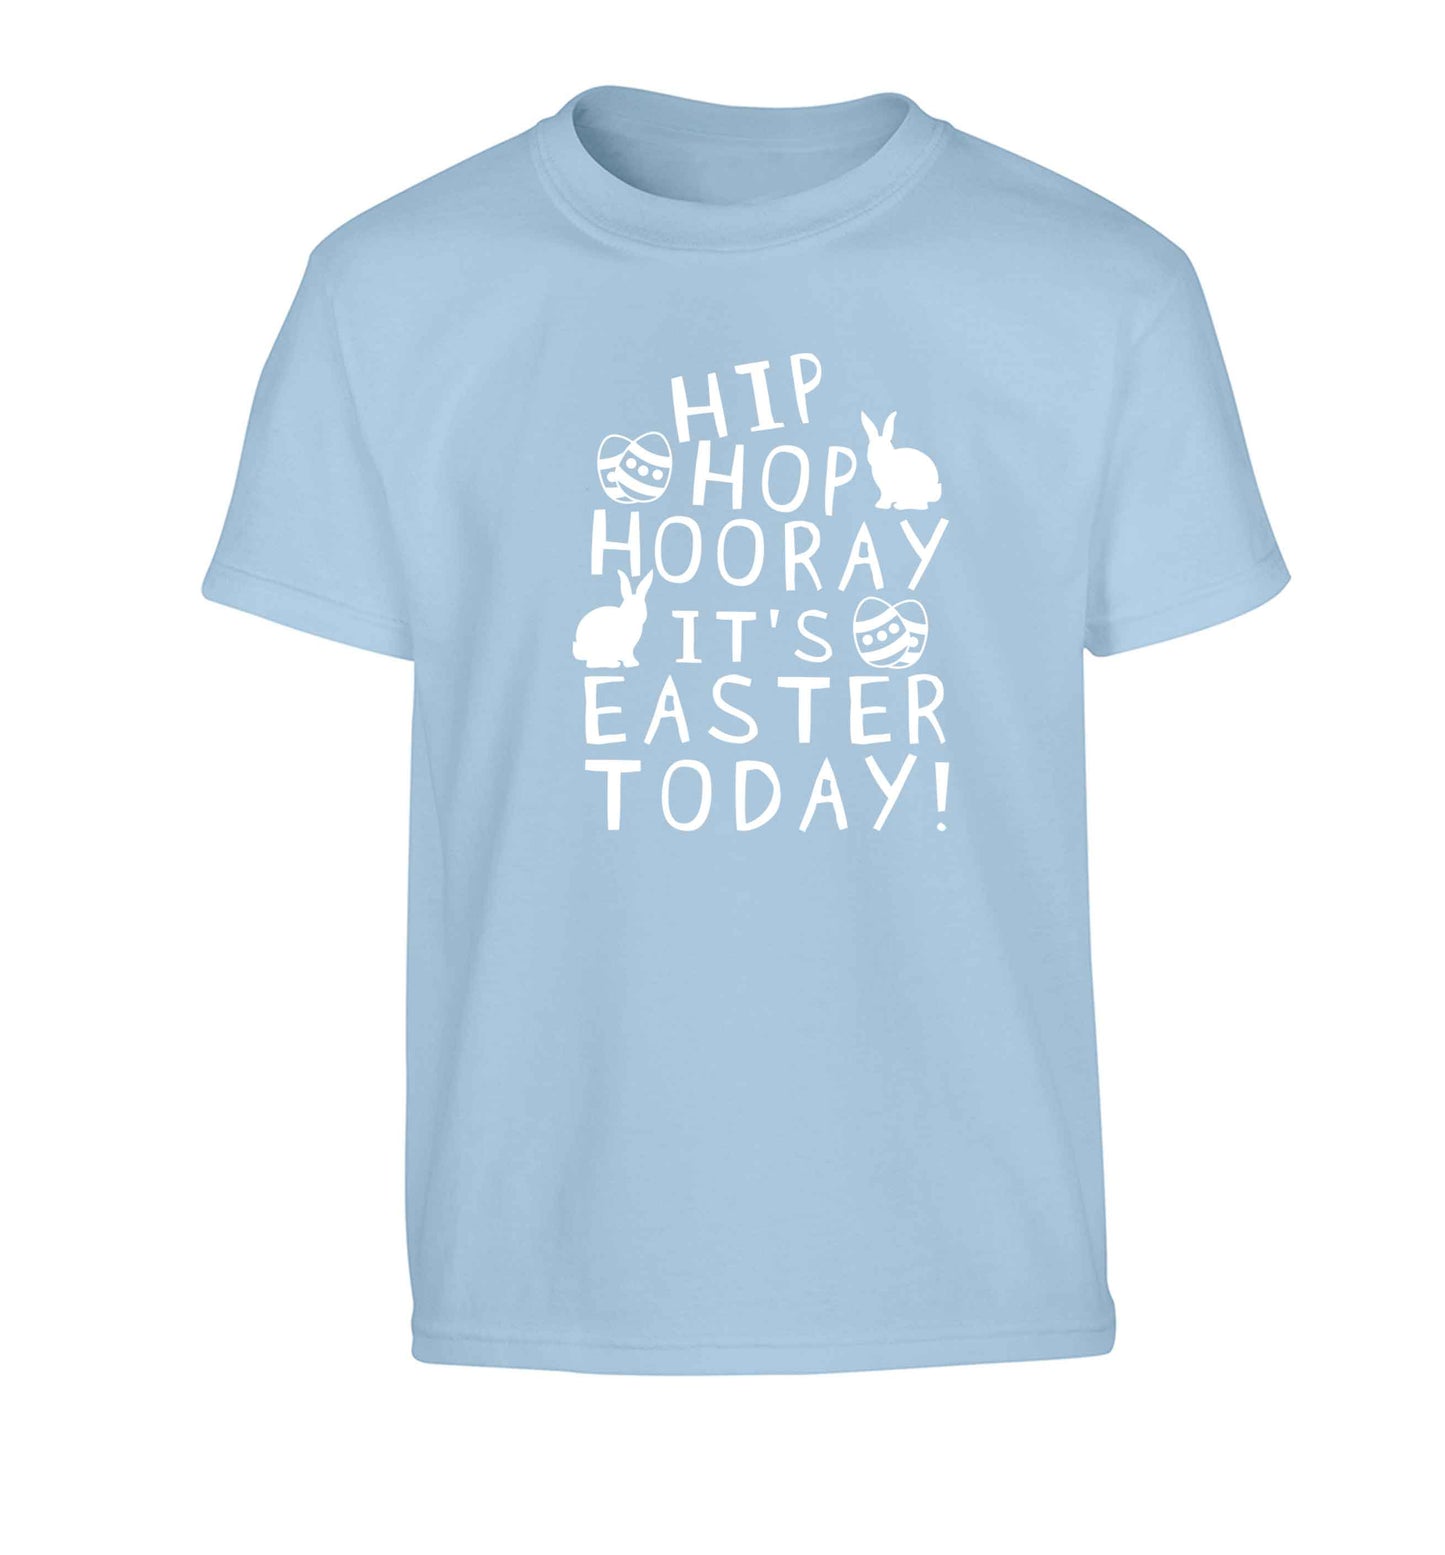 Hip hip hooray it's Easter today! Children's light blue Tshirt 12-13 Years